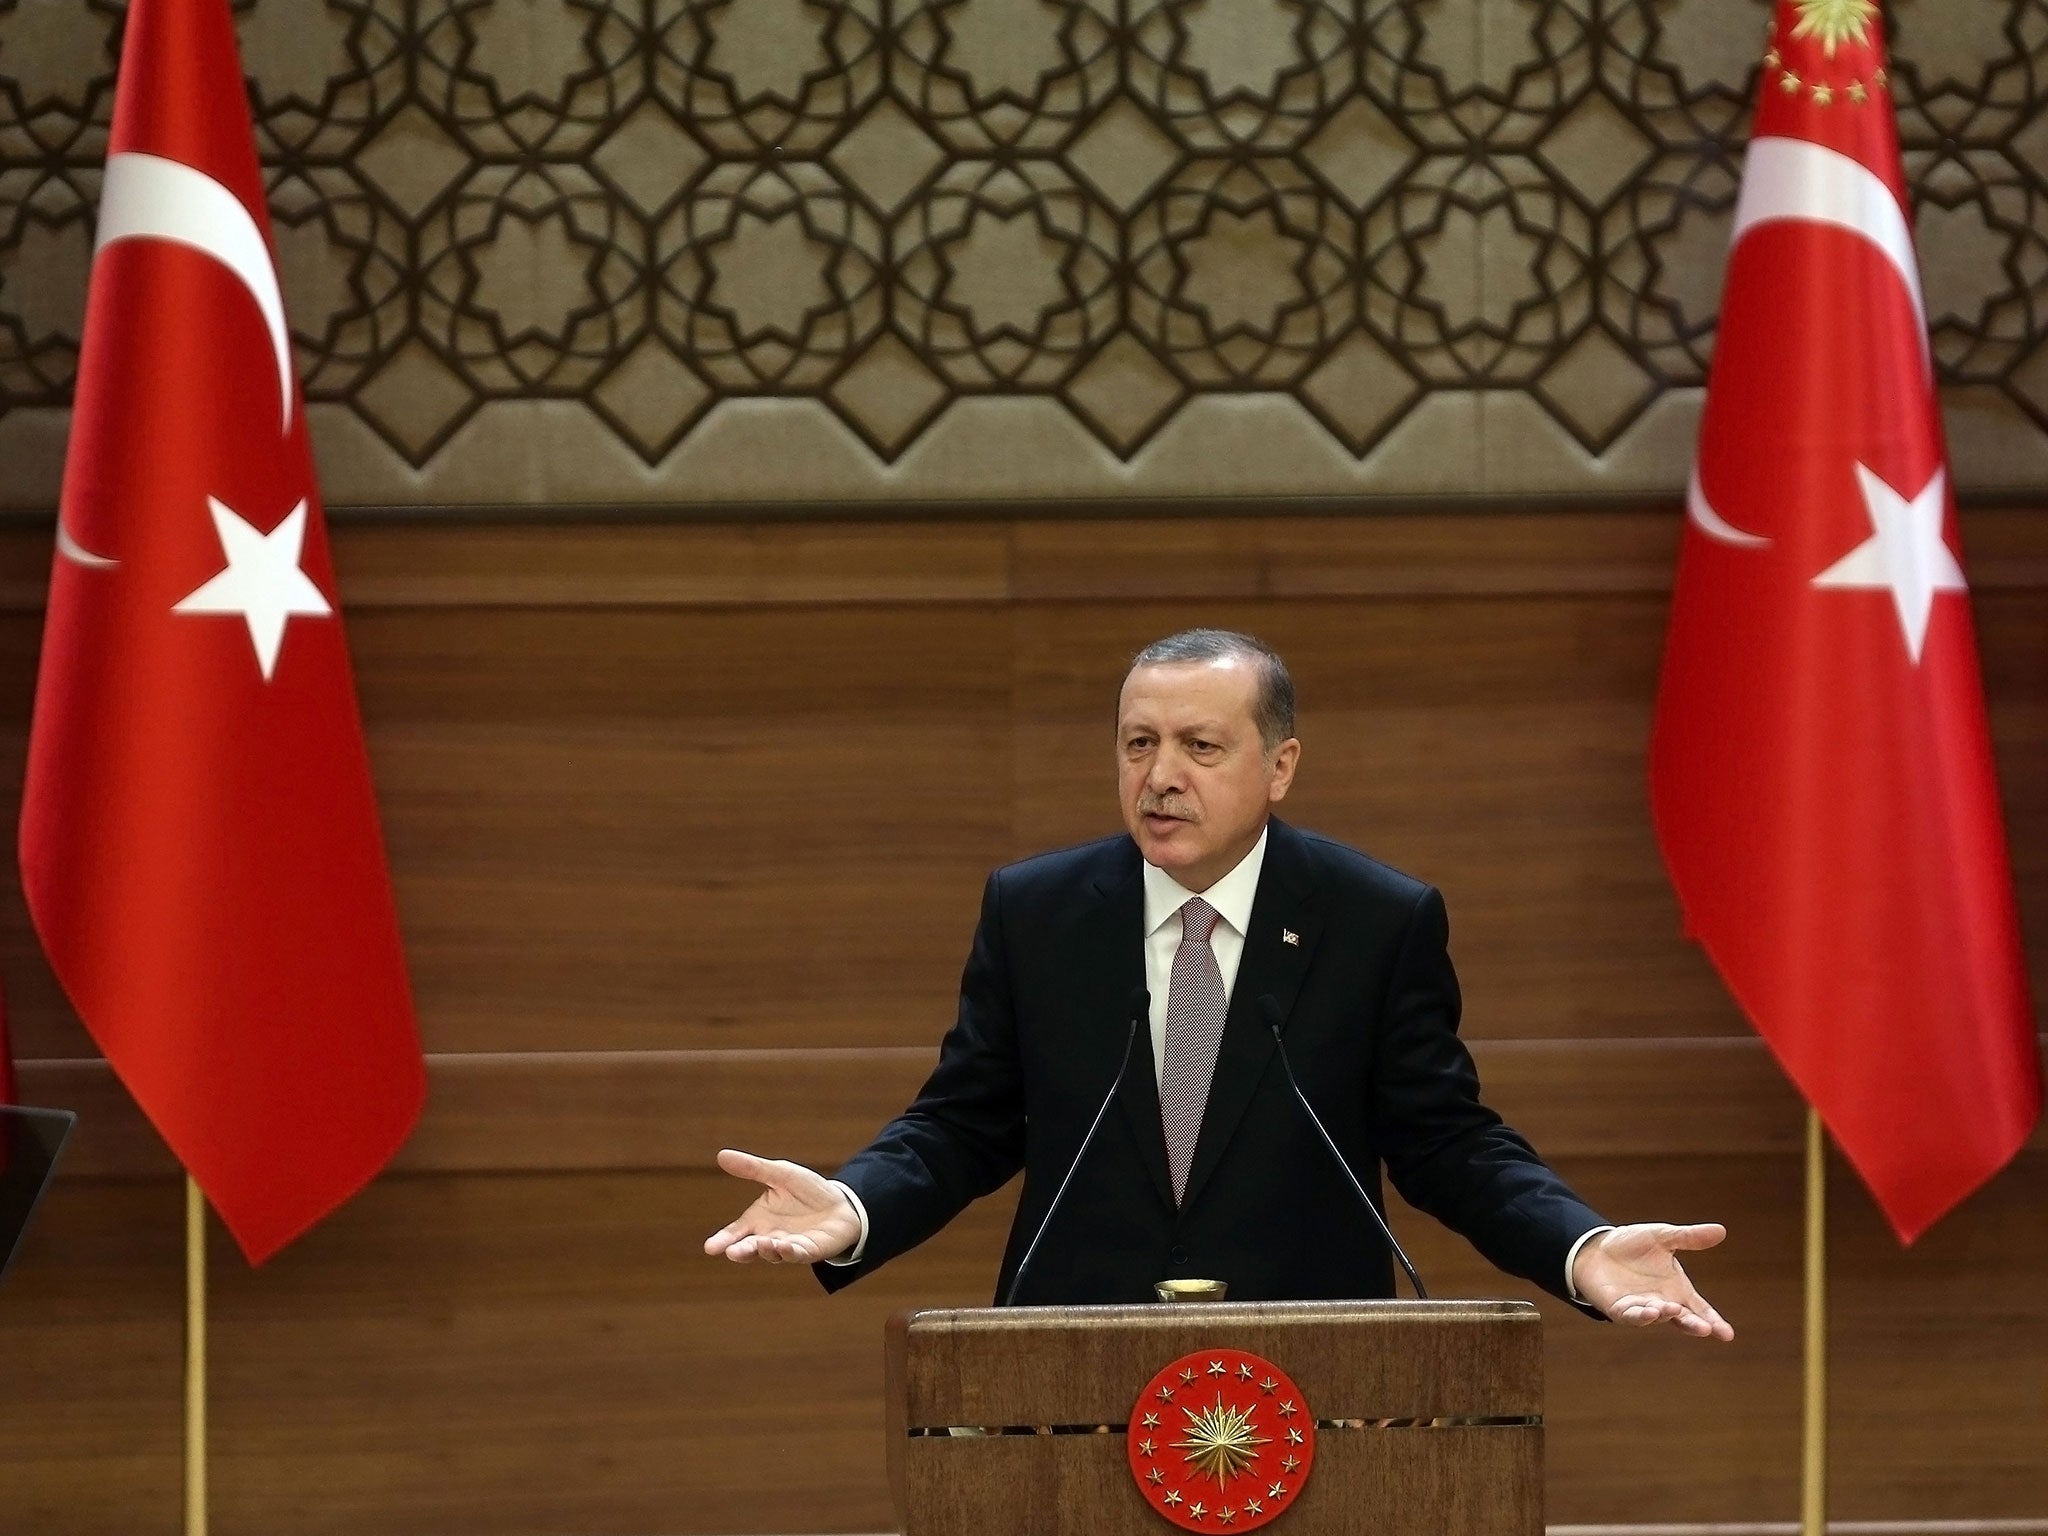 Turkish President Recep Tayyip Erdogan delivers a speech during a meeting at the presidential palace on November 26, 2015